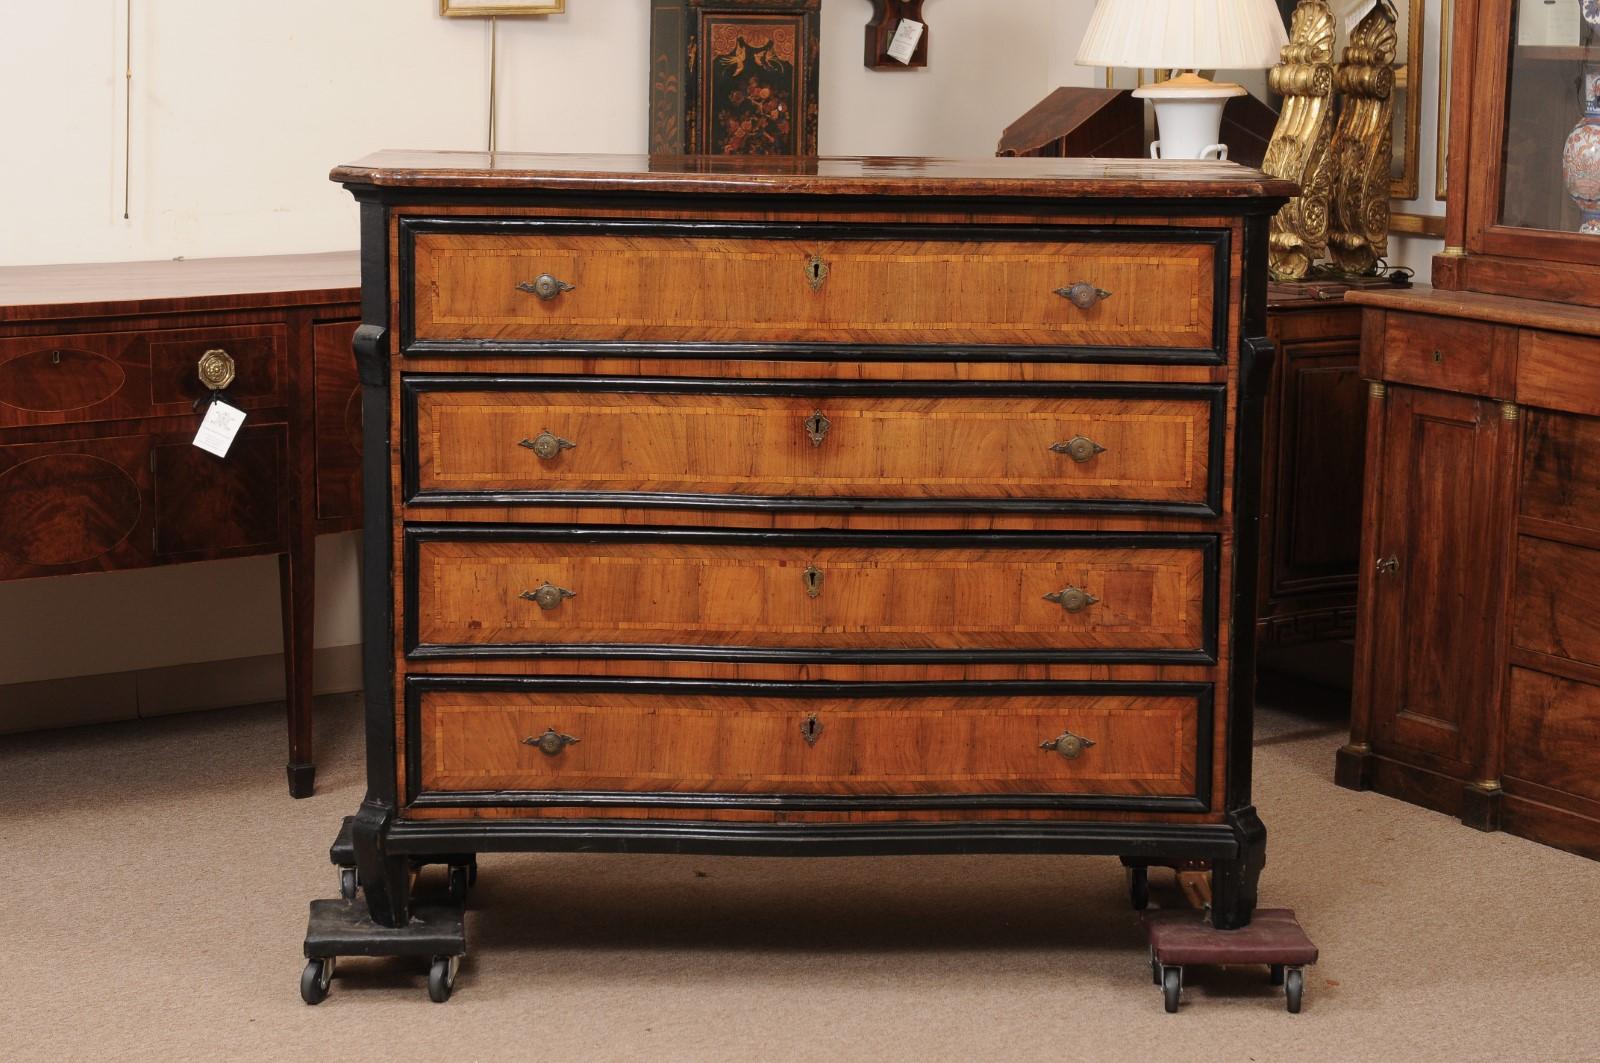 Large Early 18th Century Italian Canterano Walnut Inlaid Commode with 4 Drawers  For Sale 10